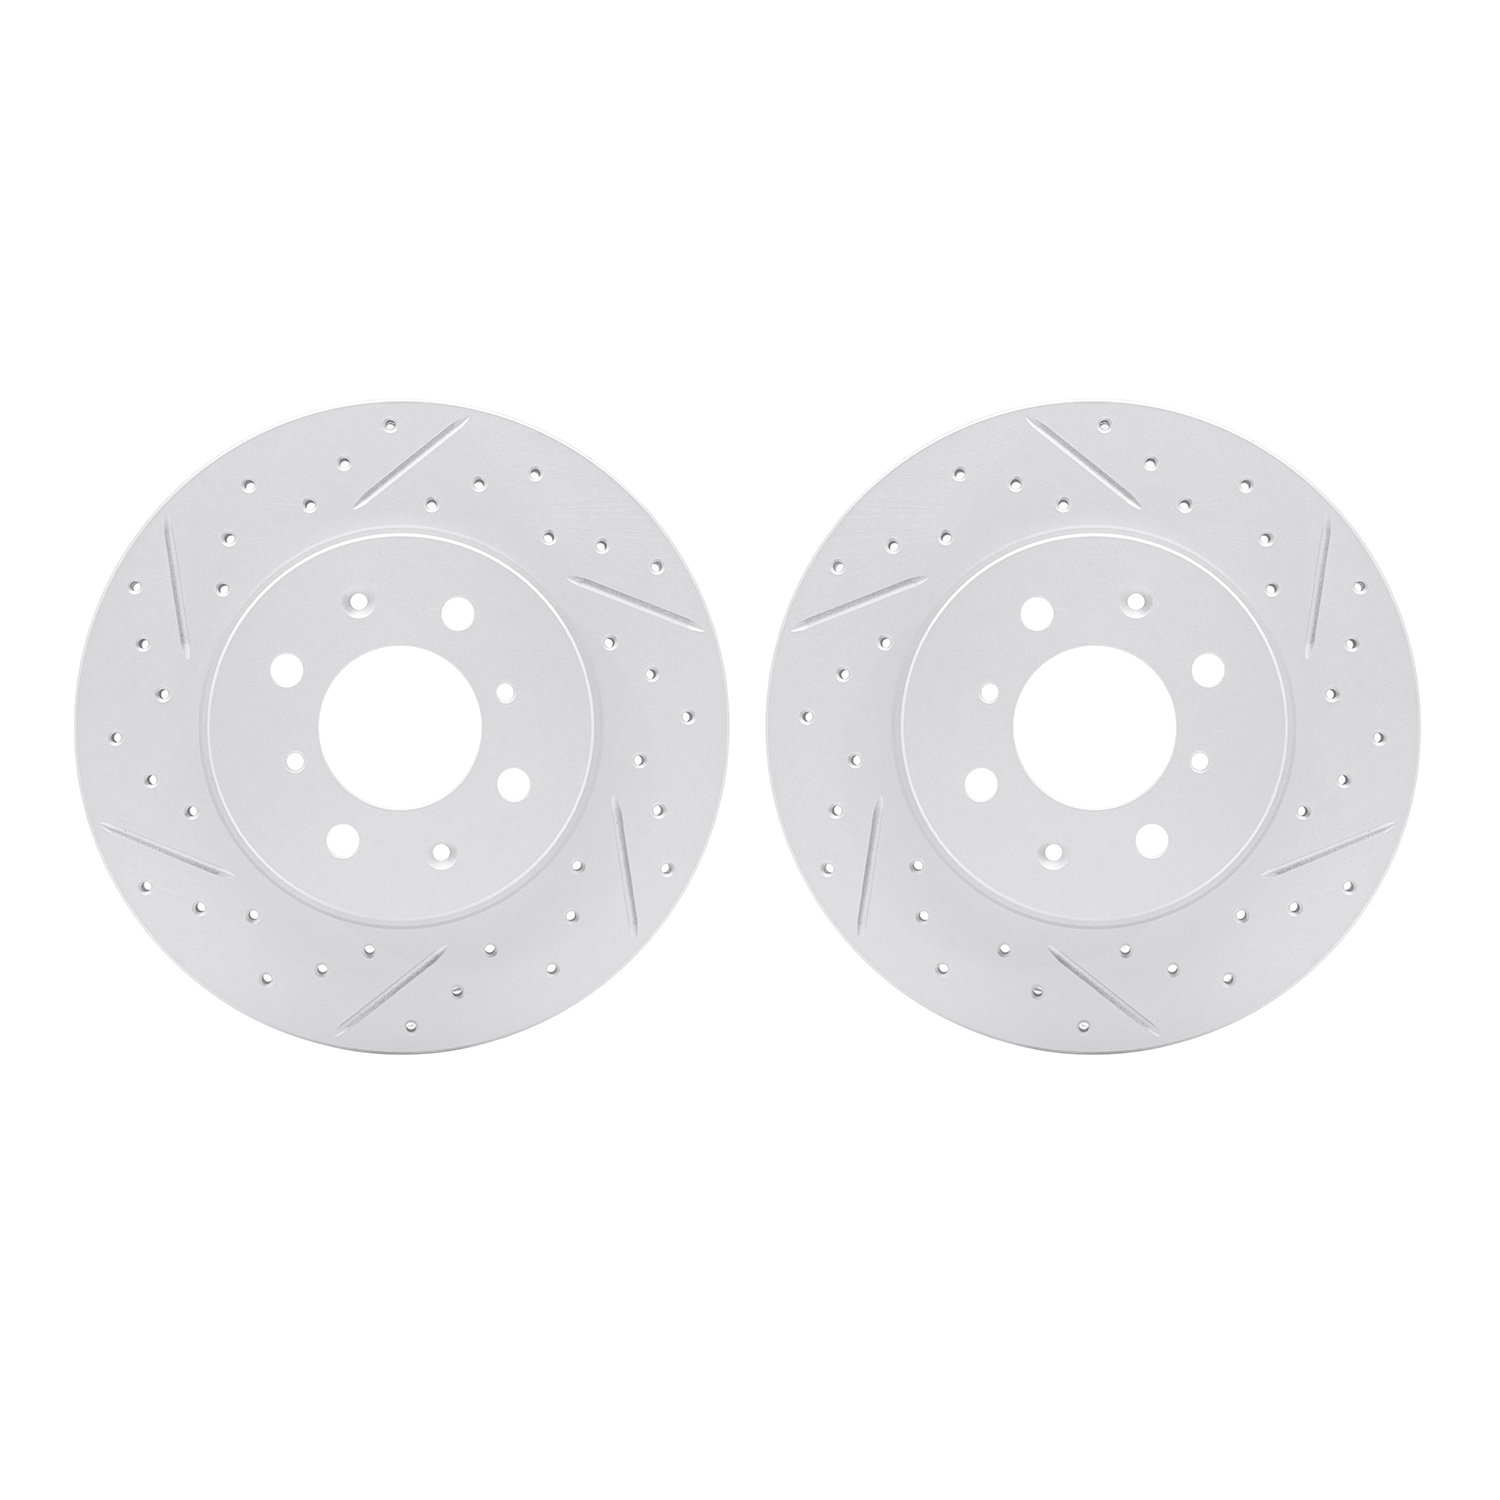 2002-59005 Geoperformance Drilled/Slotted Brake Rotors, 1990-2014 Acura/Honda, Position: Front